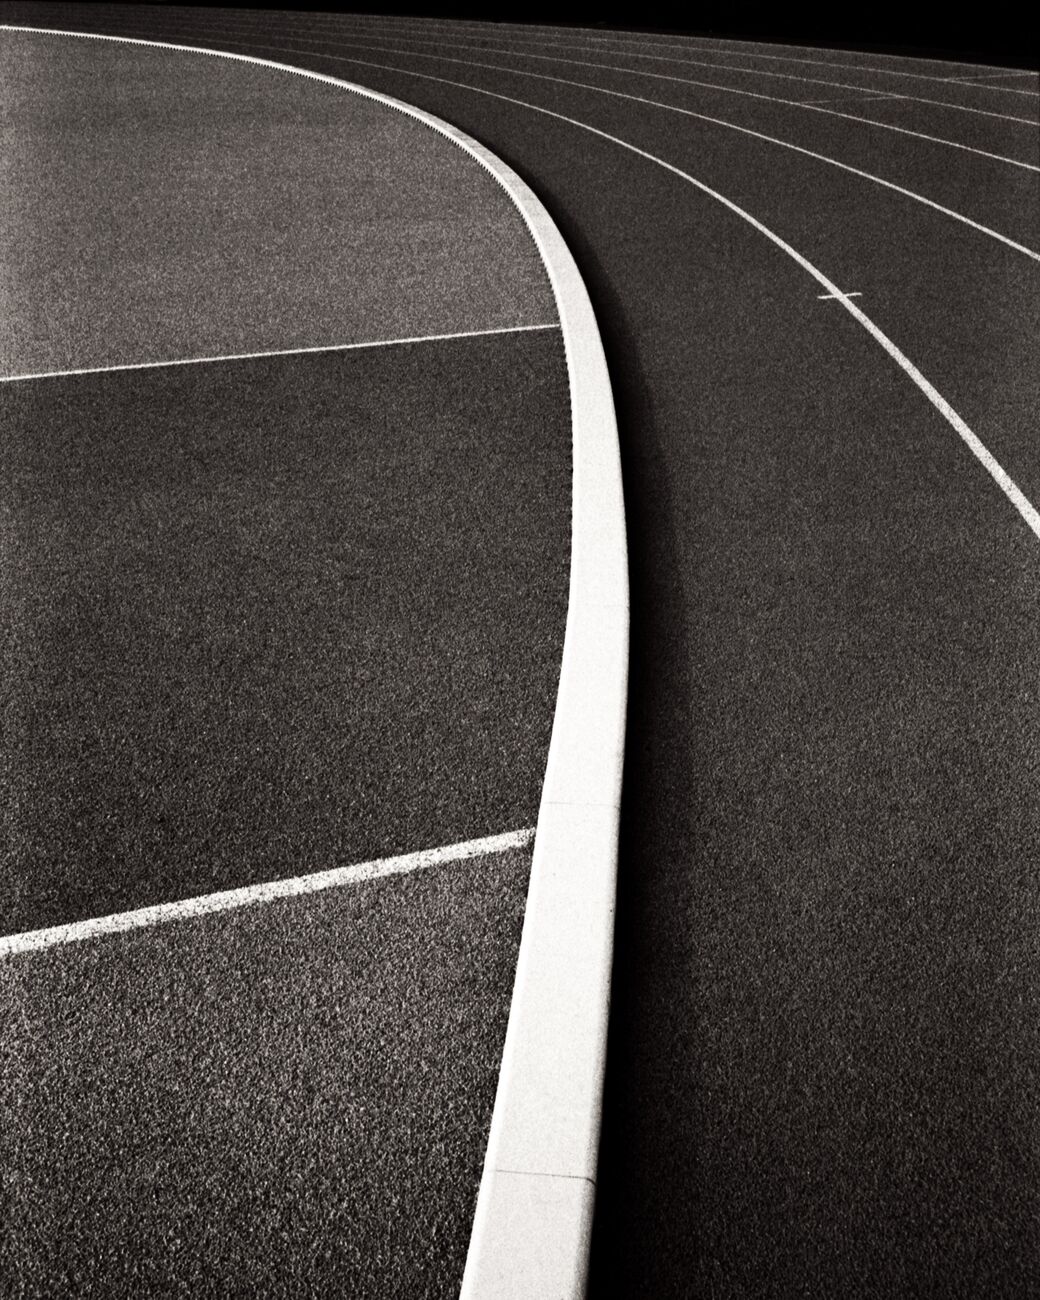 Photograph print 22 x 27.6 in, Running Track. Ref-11621-5 - Denis Olivier Art Photography